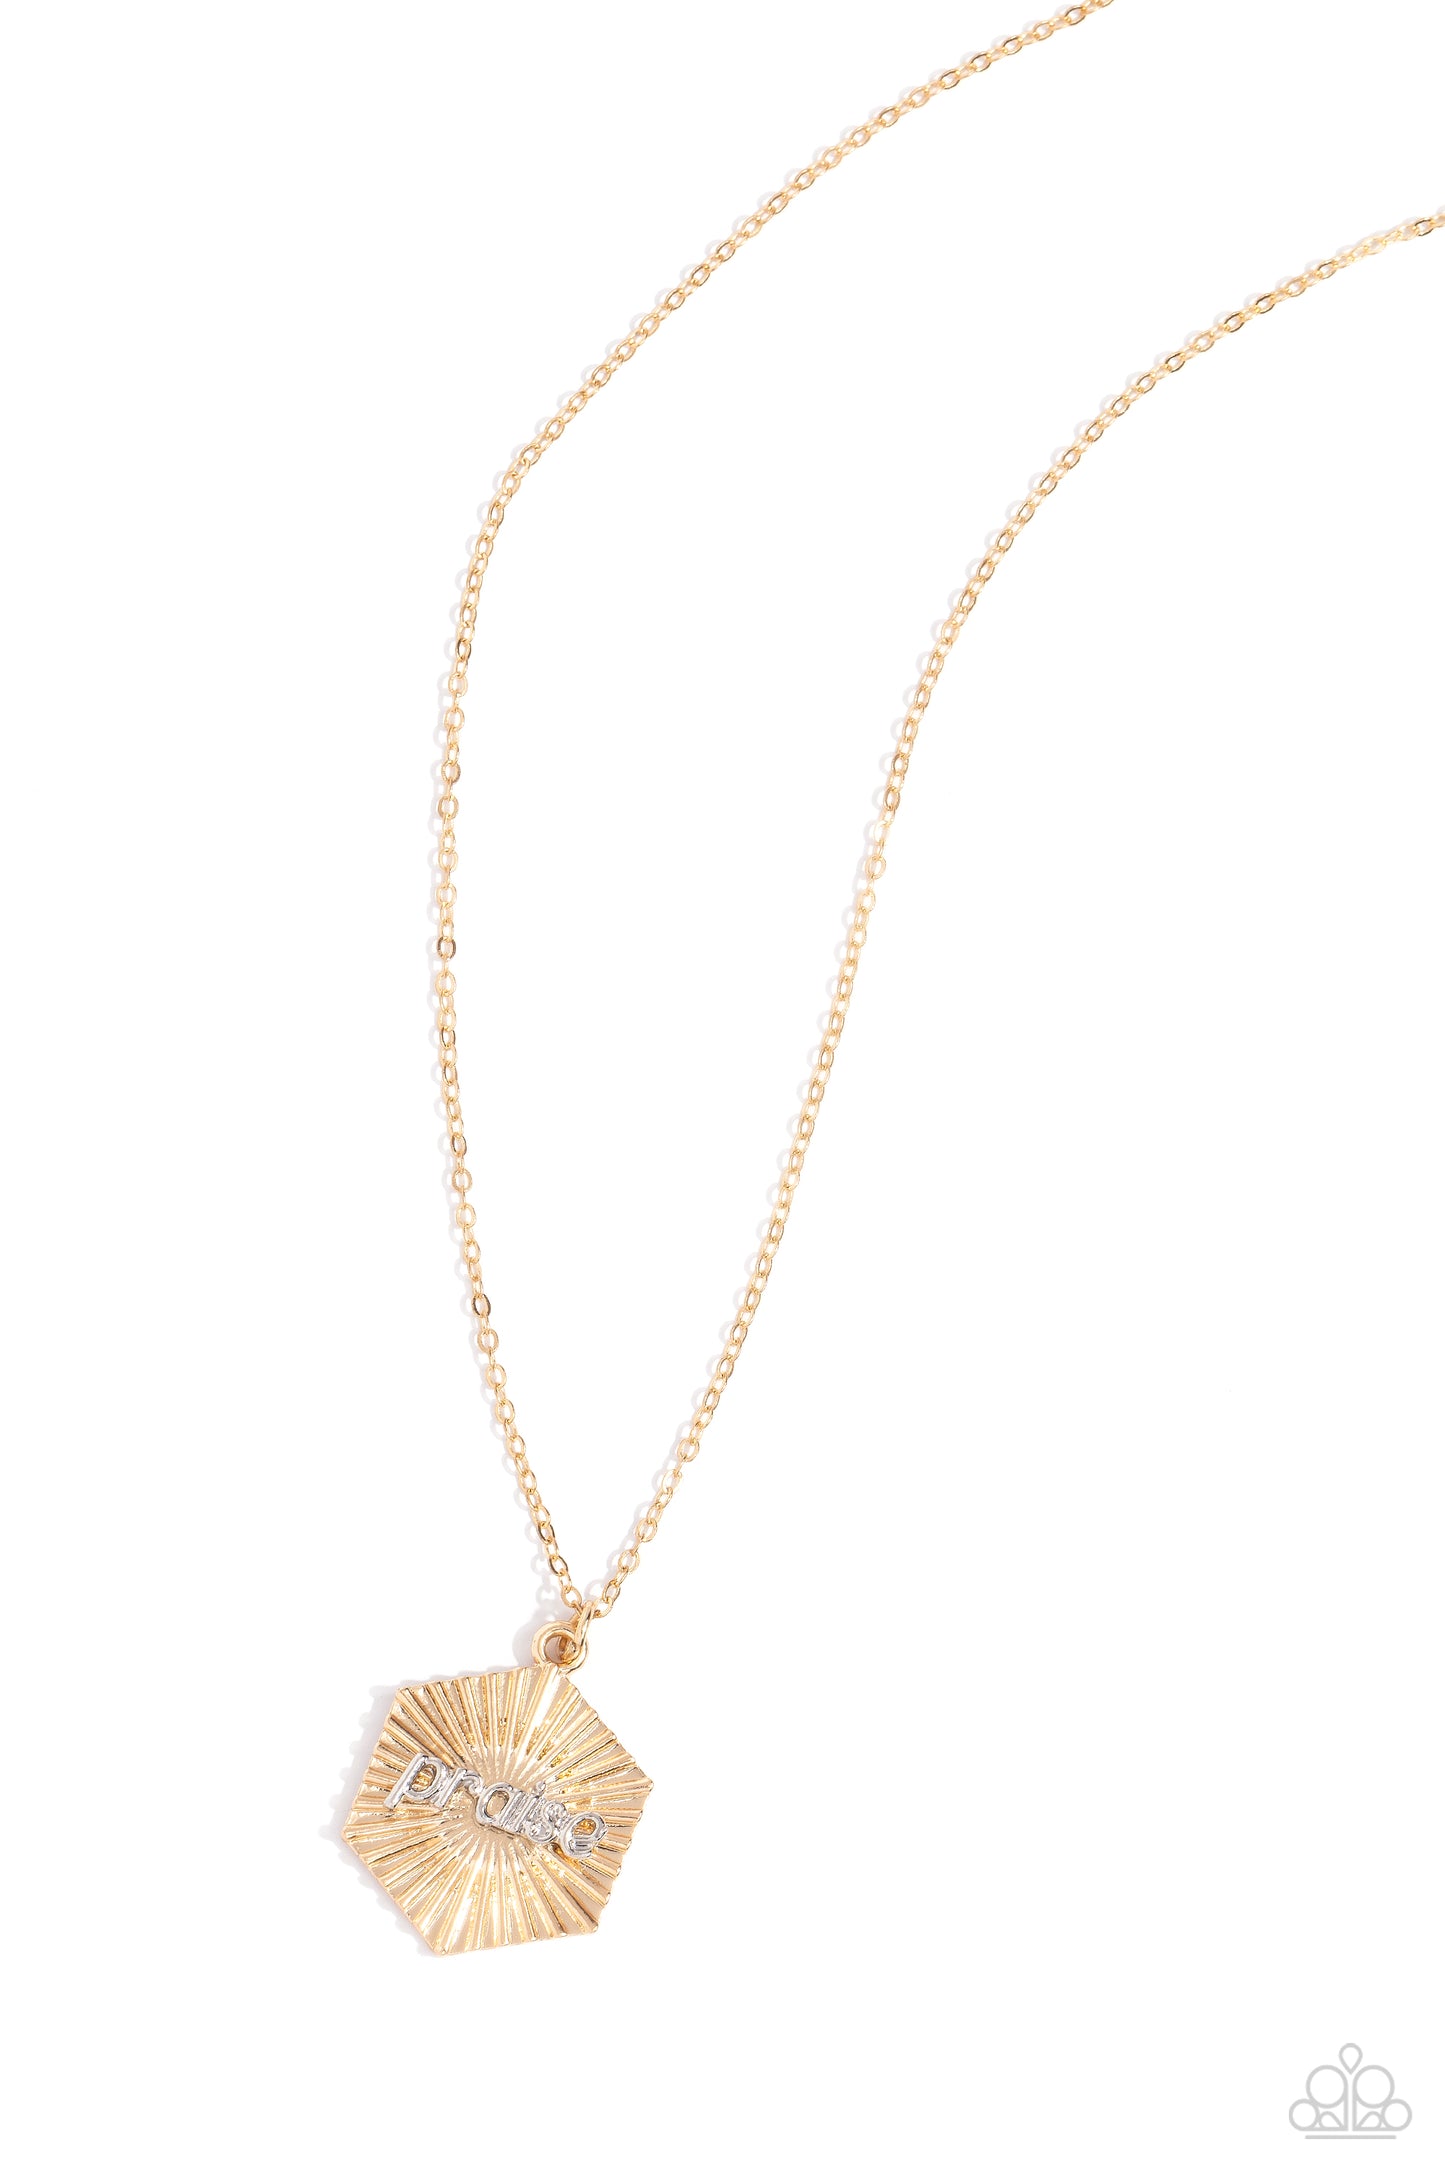 Turn of PRAISE Gold Inspirational Necklace - Paparazzi Accessories  Crinkled with texture, a gold hexagon radiates as it delicately falls from a dainty gold chain for a stunning metallic design. The silver word "praise" rests atop the golden folds for a religious-inspired finish. Features an adjustable clasp closure.  Sold as one individual necklace. Includes one pair of matching earrings.  P2WD-GDXX-329XX